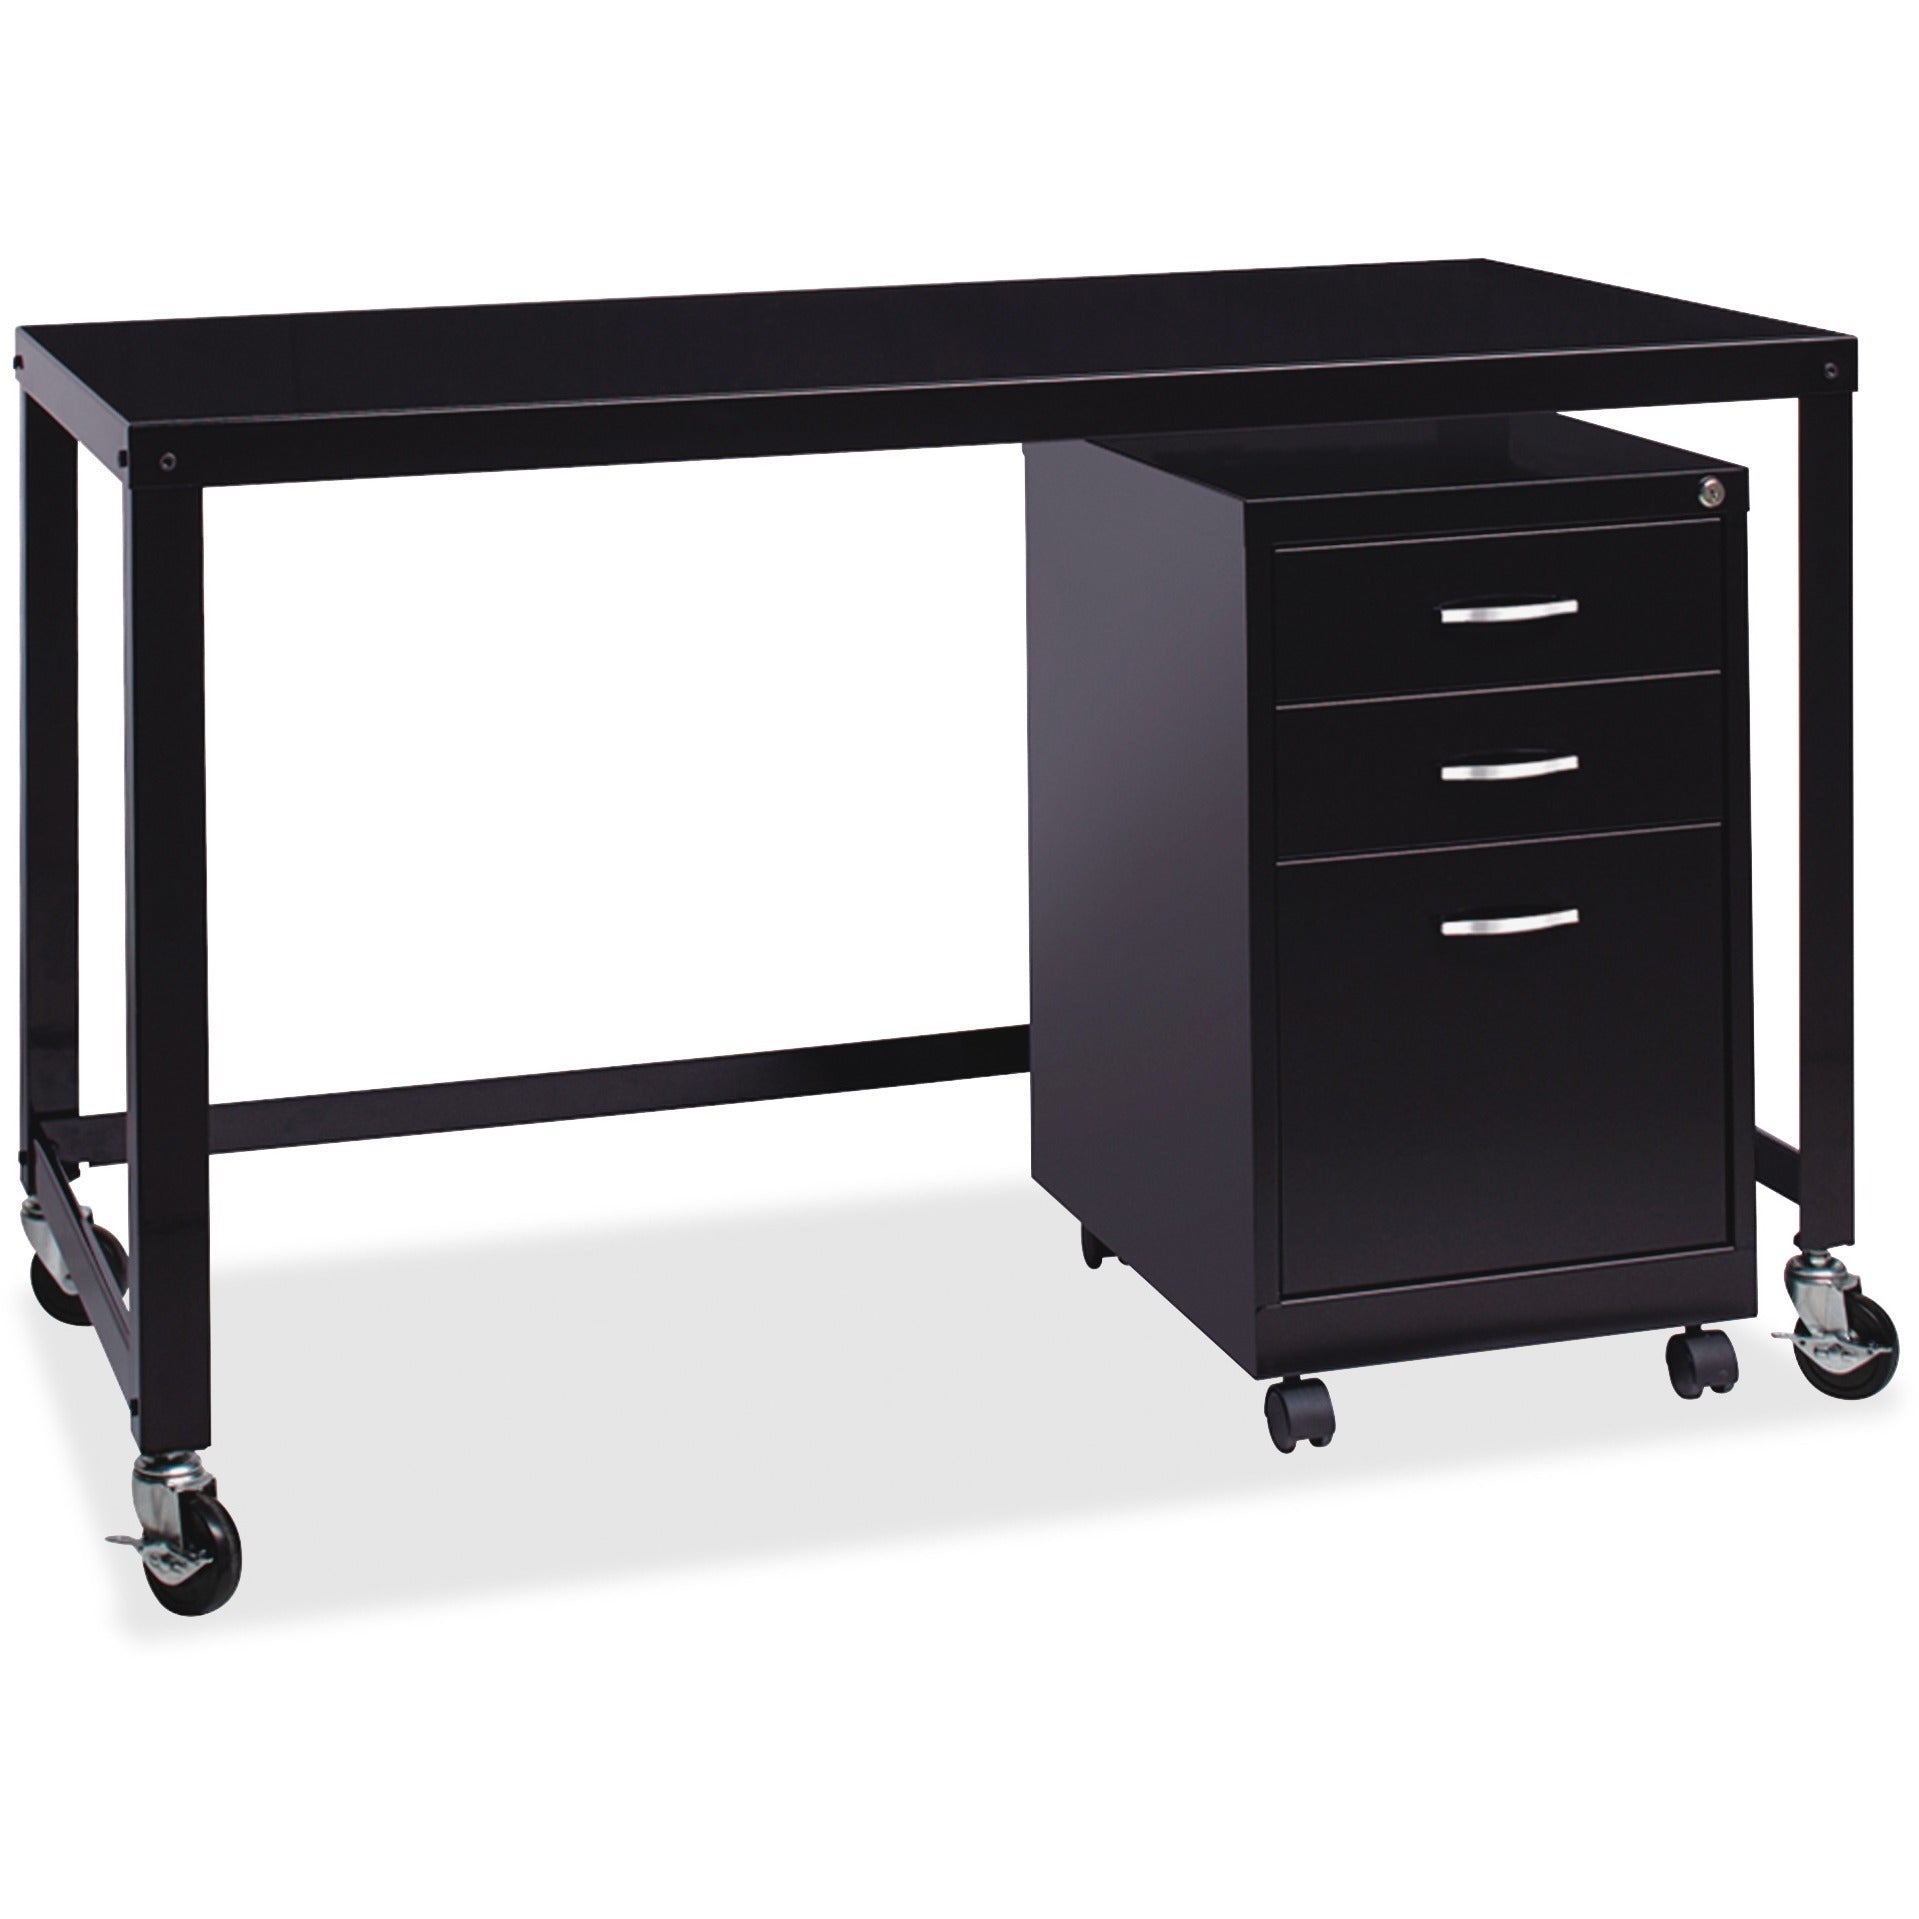 lorell-soho-personal-mobile-desk-for-table-toprectangle-top-x-48-table-top-width-x-23-table-top-depth-2950-height-assembly-required-black-1-each_llr34417 - 3